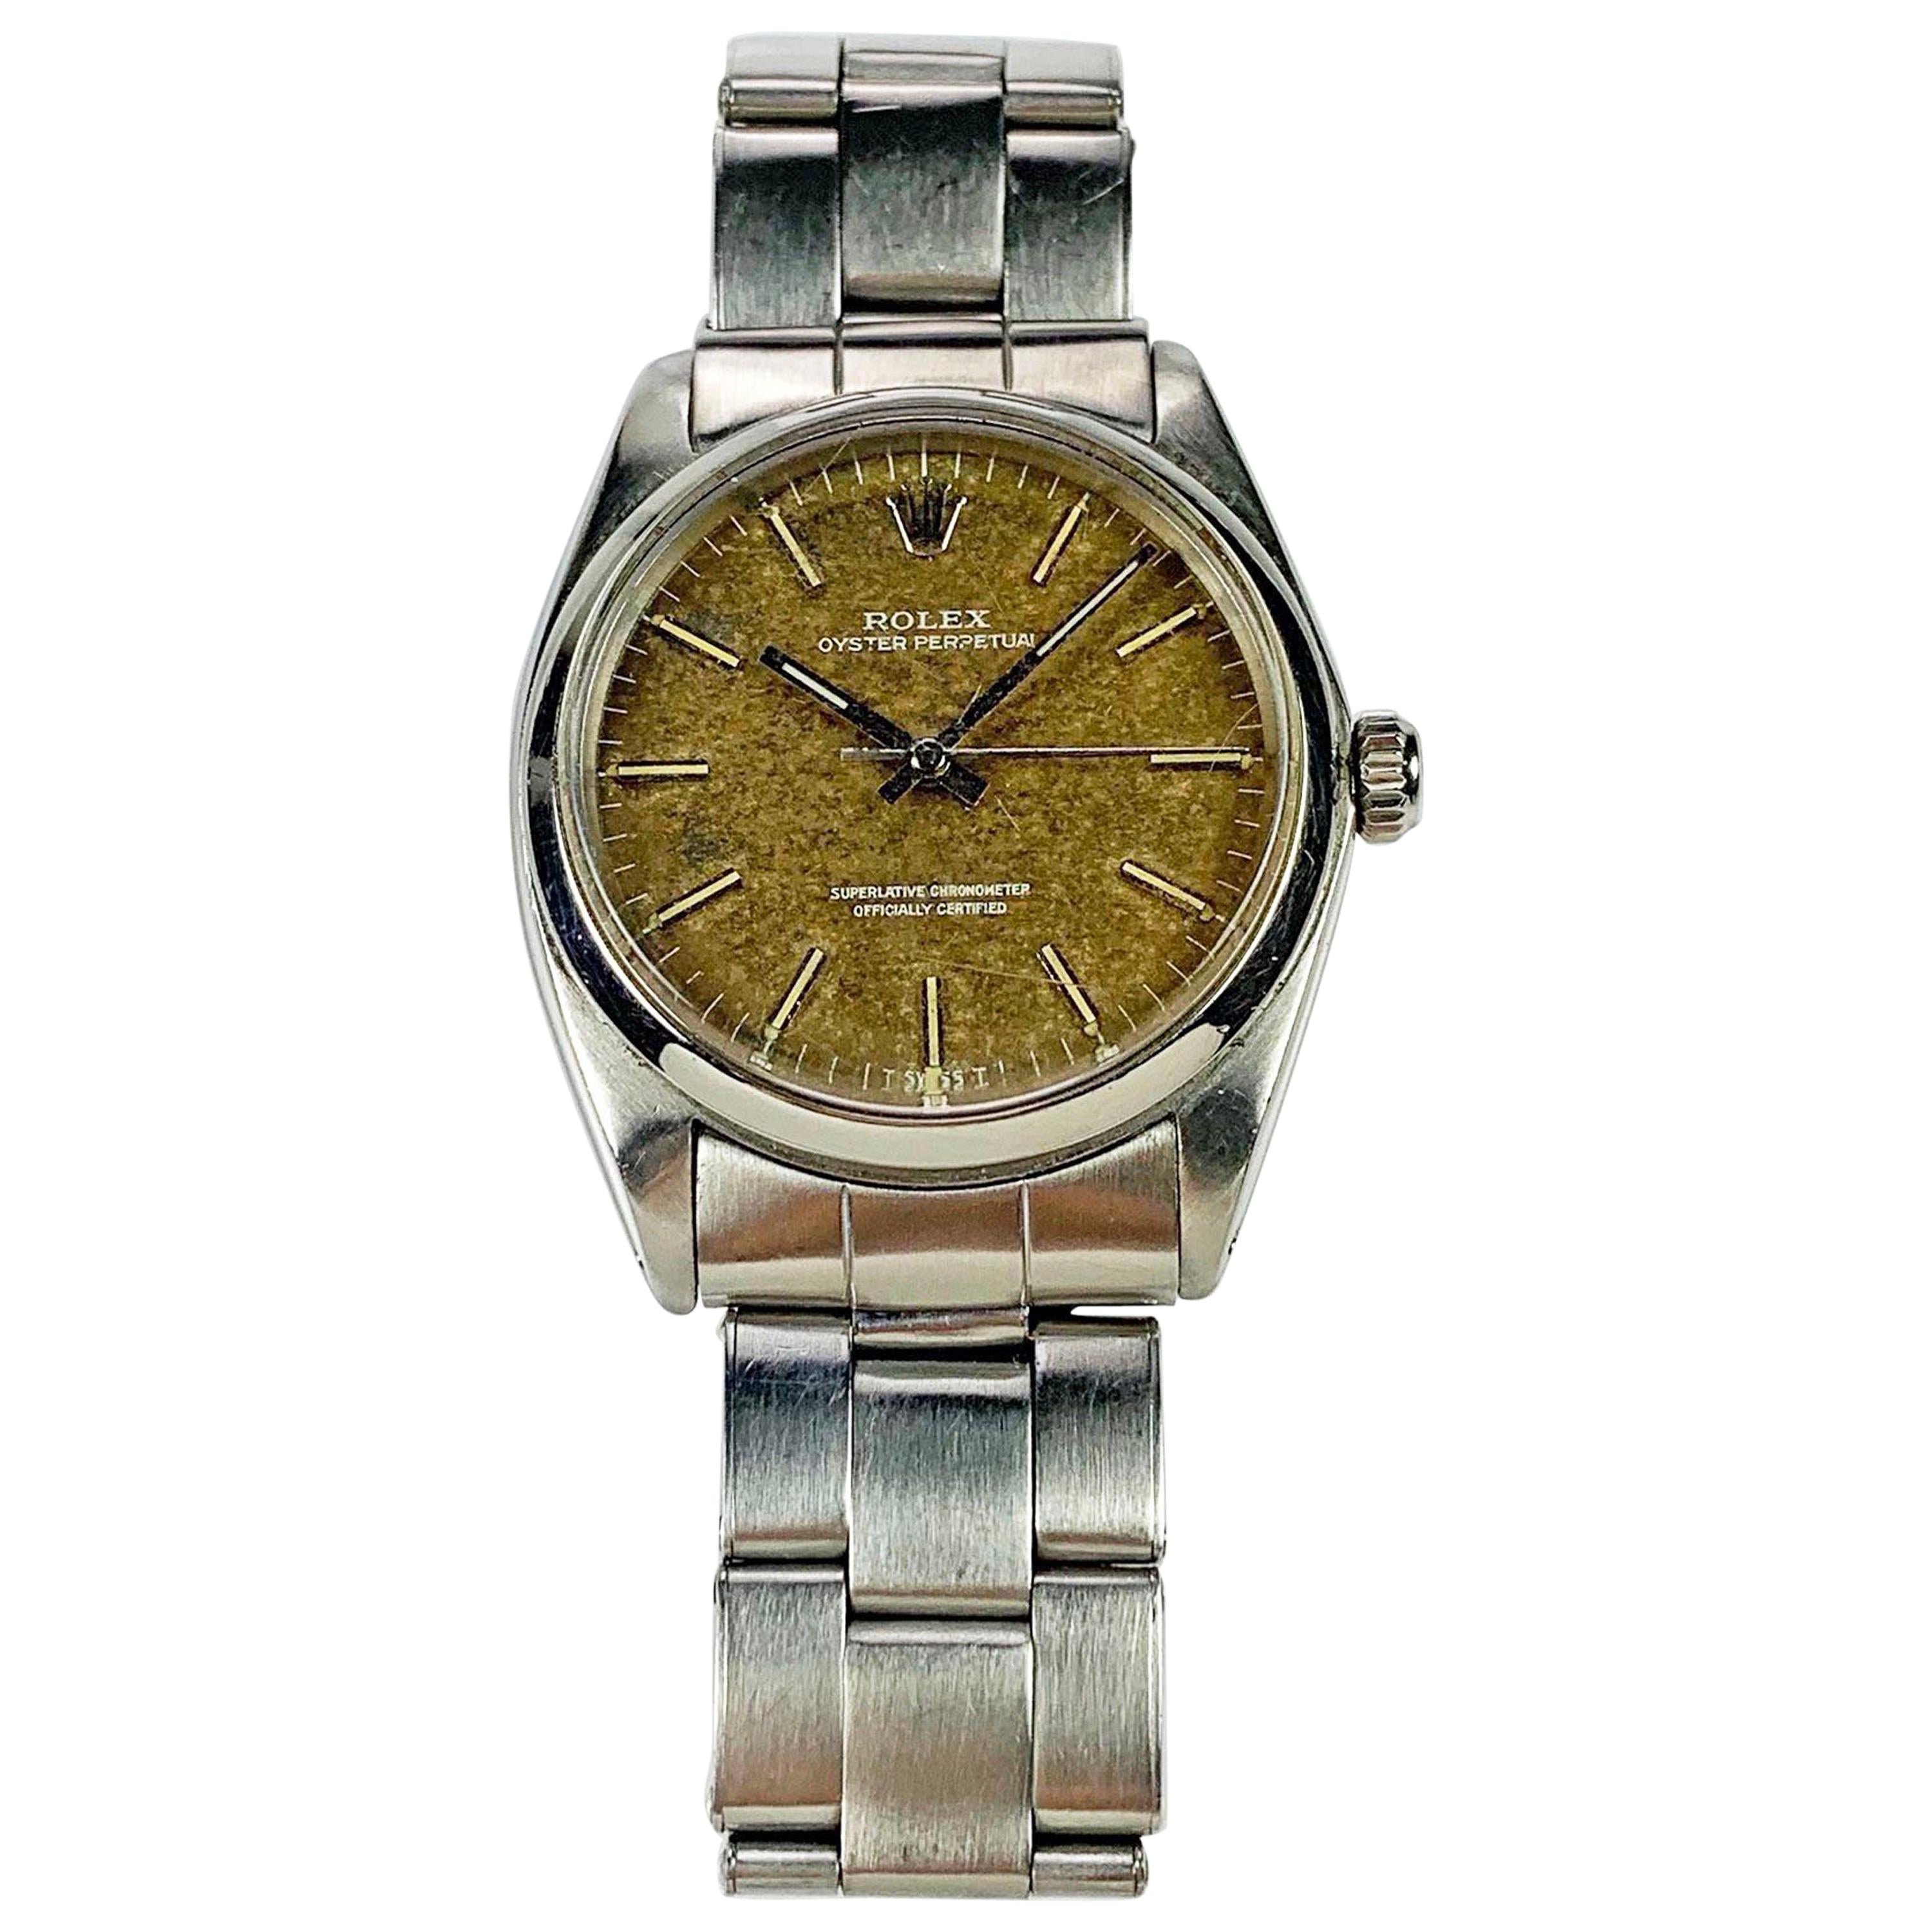 Rolex Stainless Steel Oyster Perpetual Tropical Dial Watch, 1960s